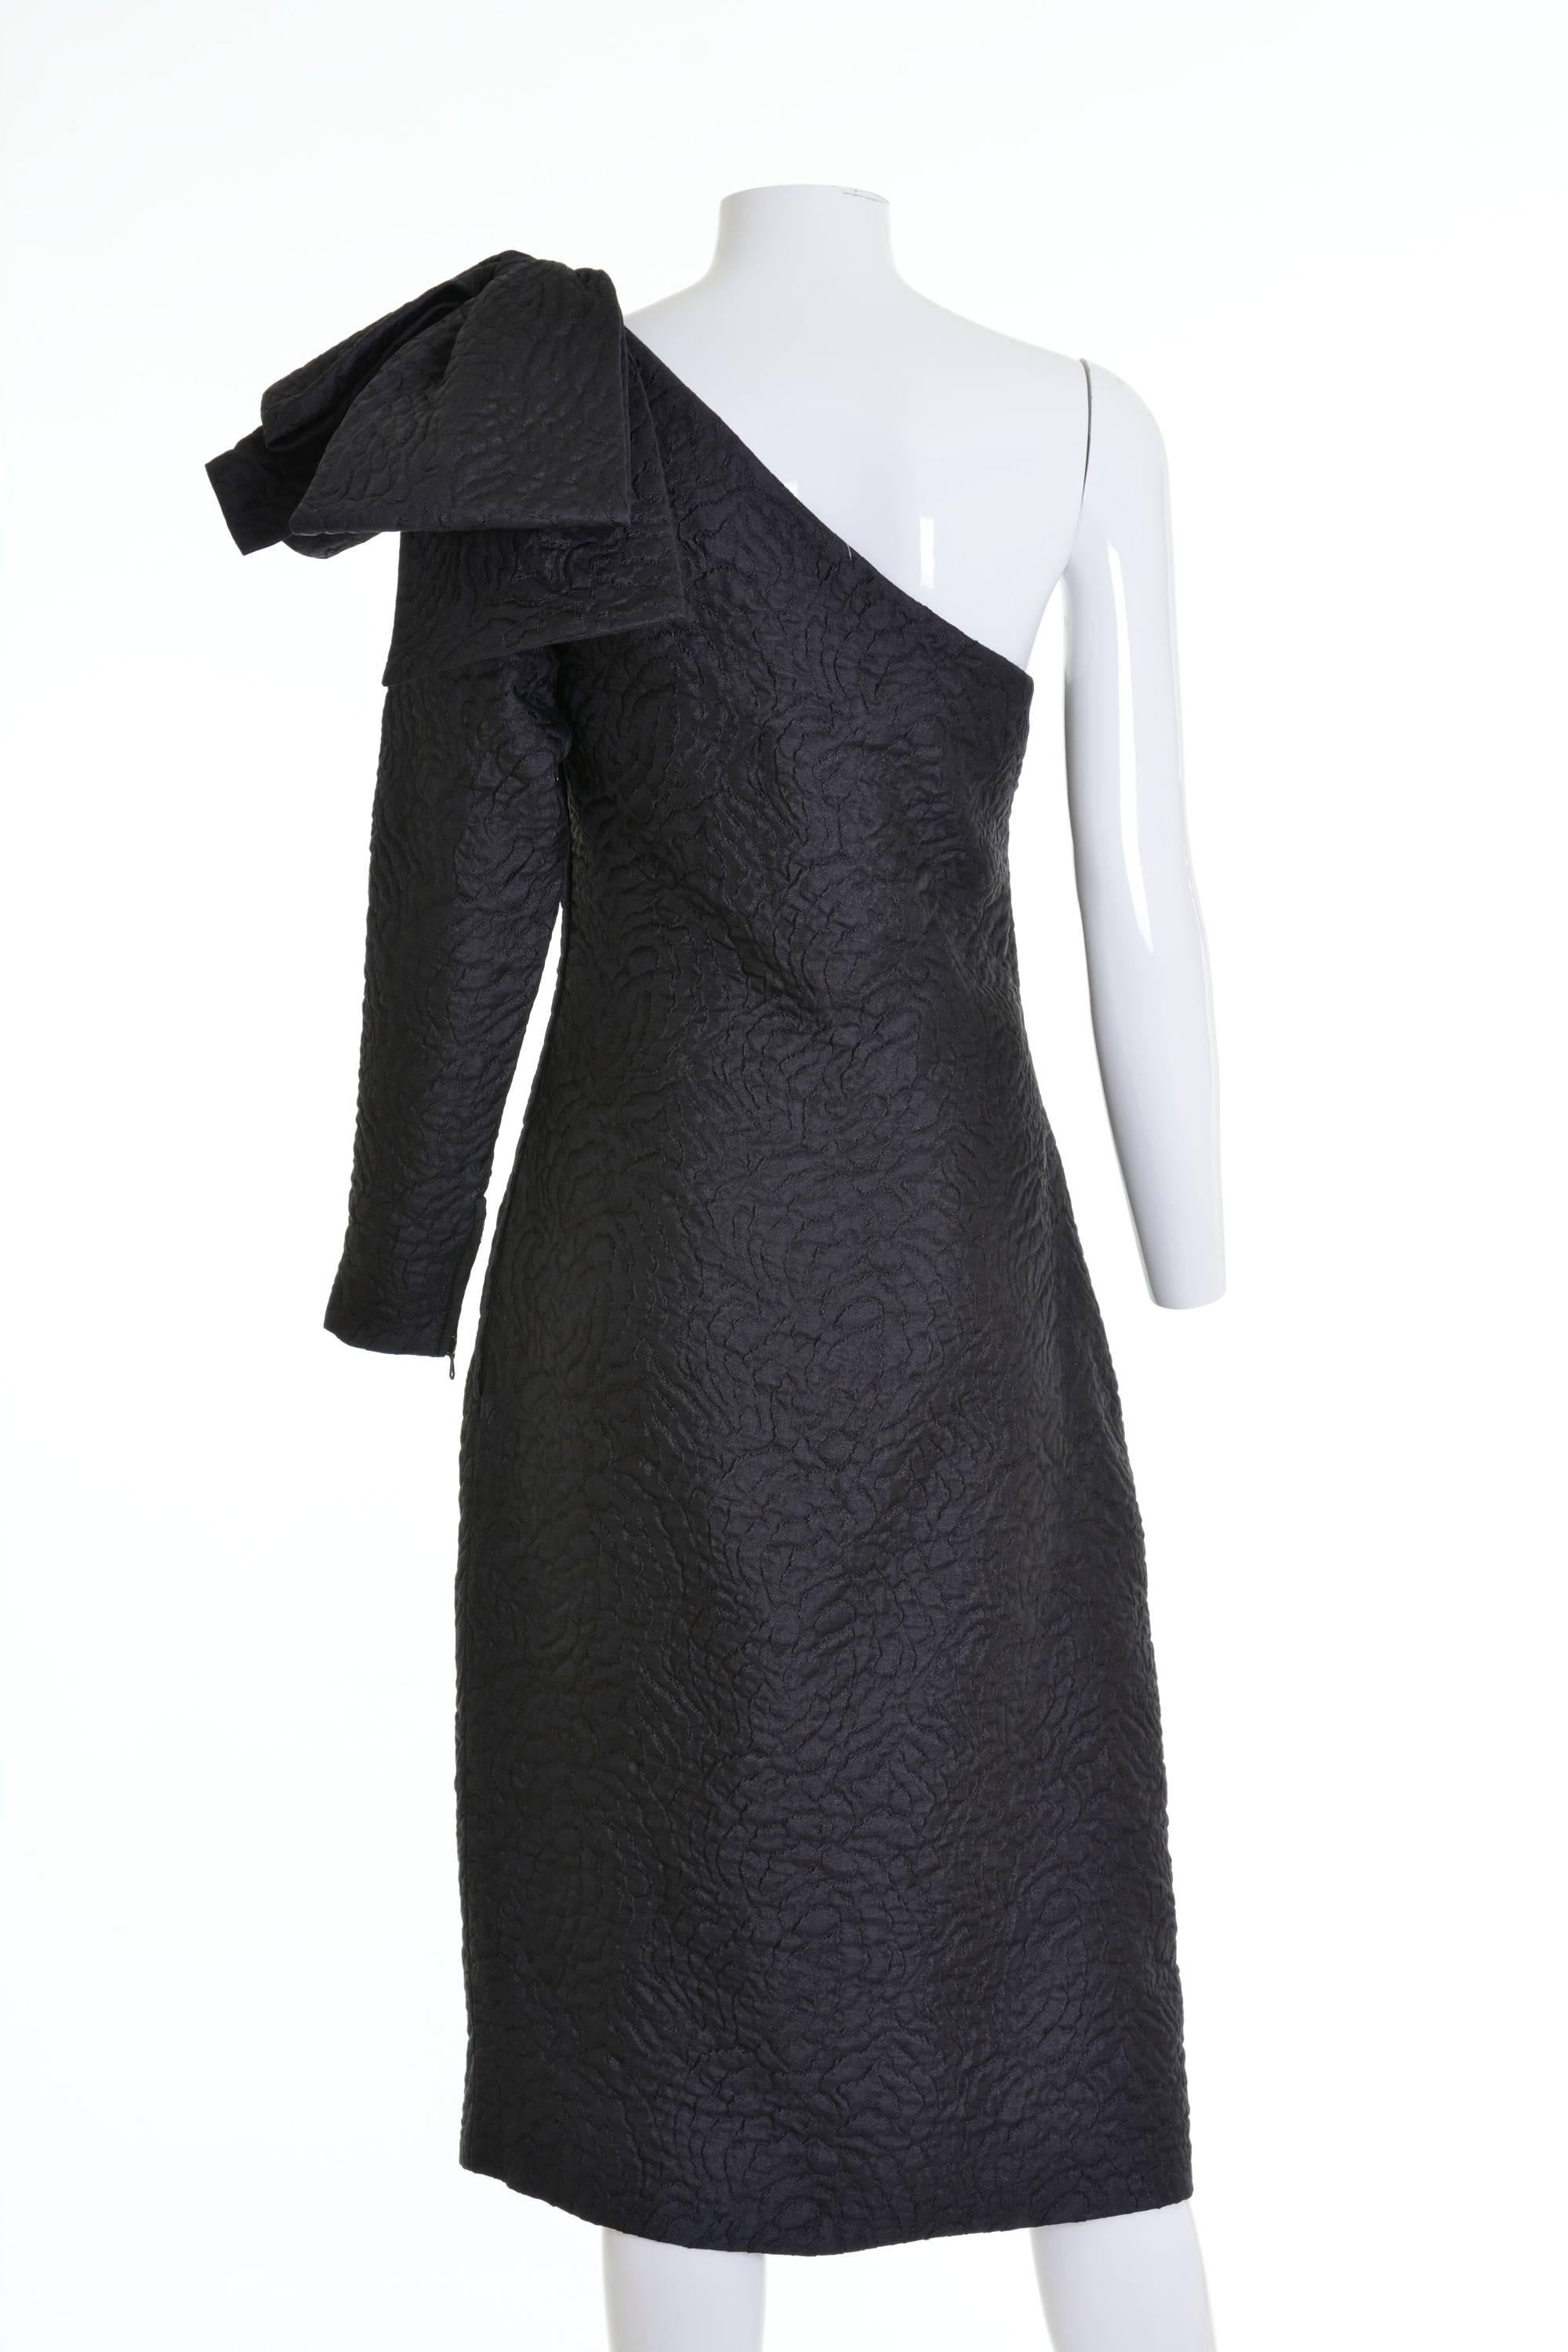 This gorgeous 1980s Yves Saint Laurent Rive Gauche one shoulder cocktail dress is in black embossed fabric.It has bow on one shoulder, side zip closure and is fully lined. 

Good Vintage Condition

Label: Saint Laurent Rive Gauche - Made in France